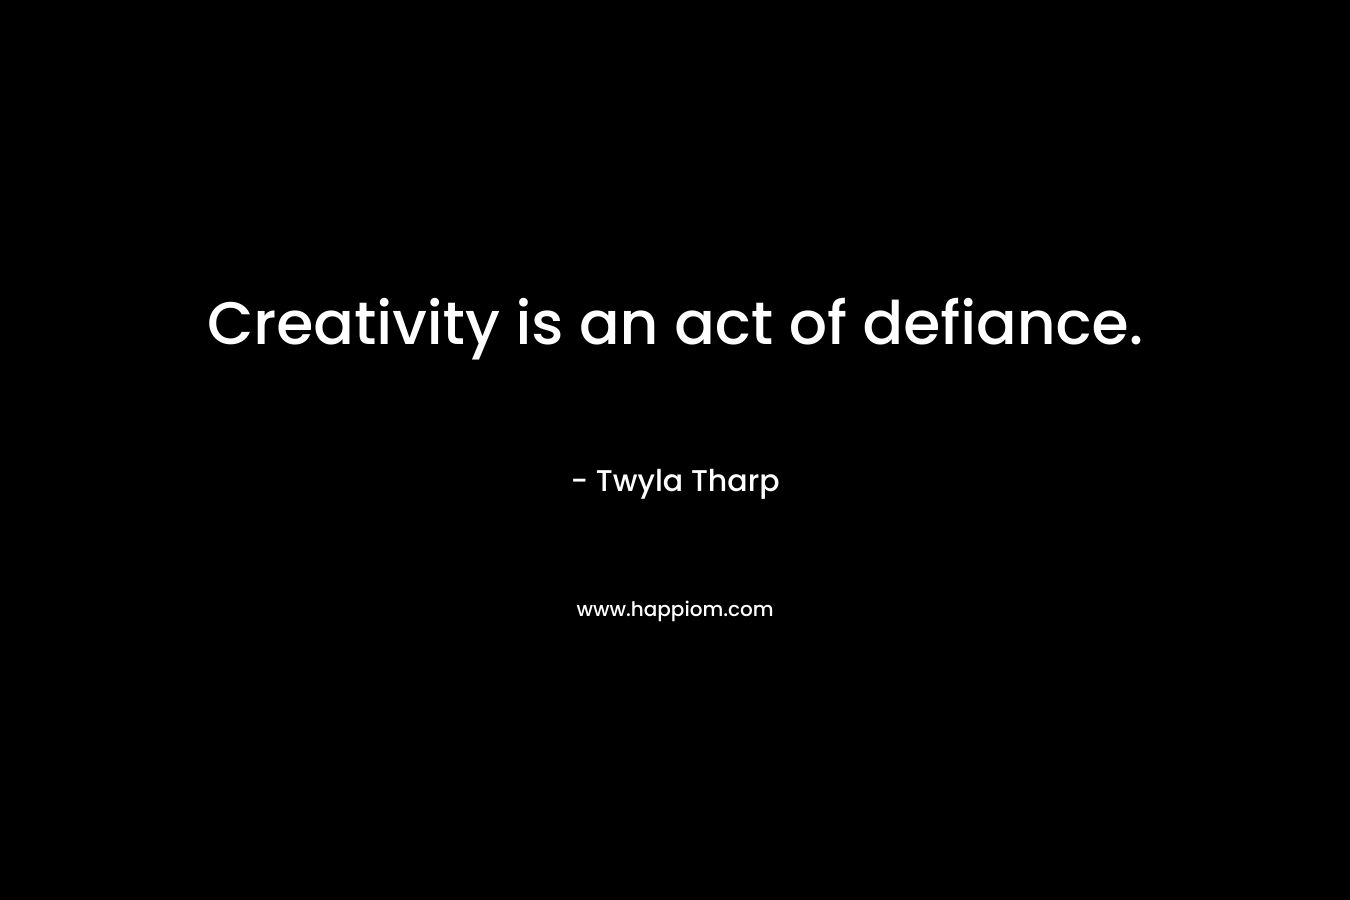 Creativity is an act of defiance. – Twyla Tharp